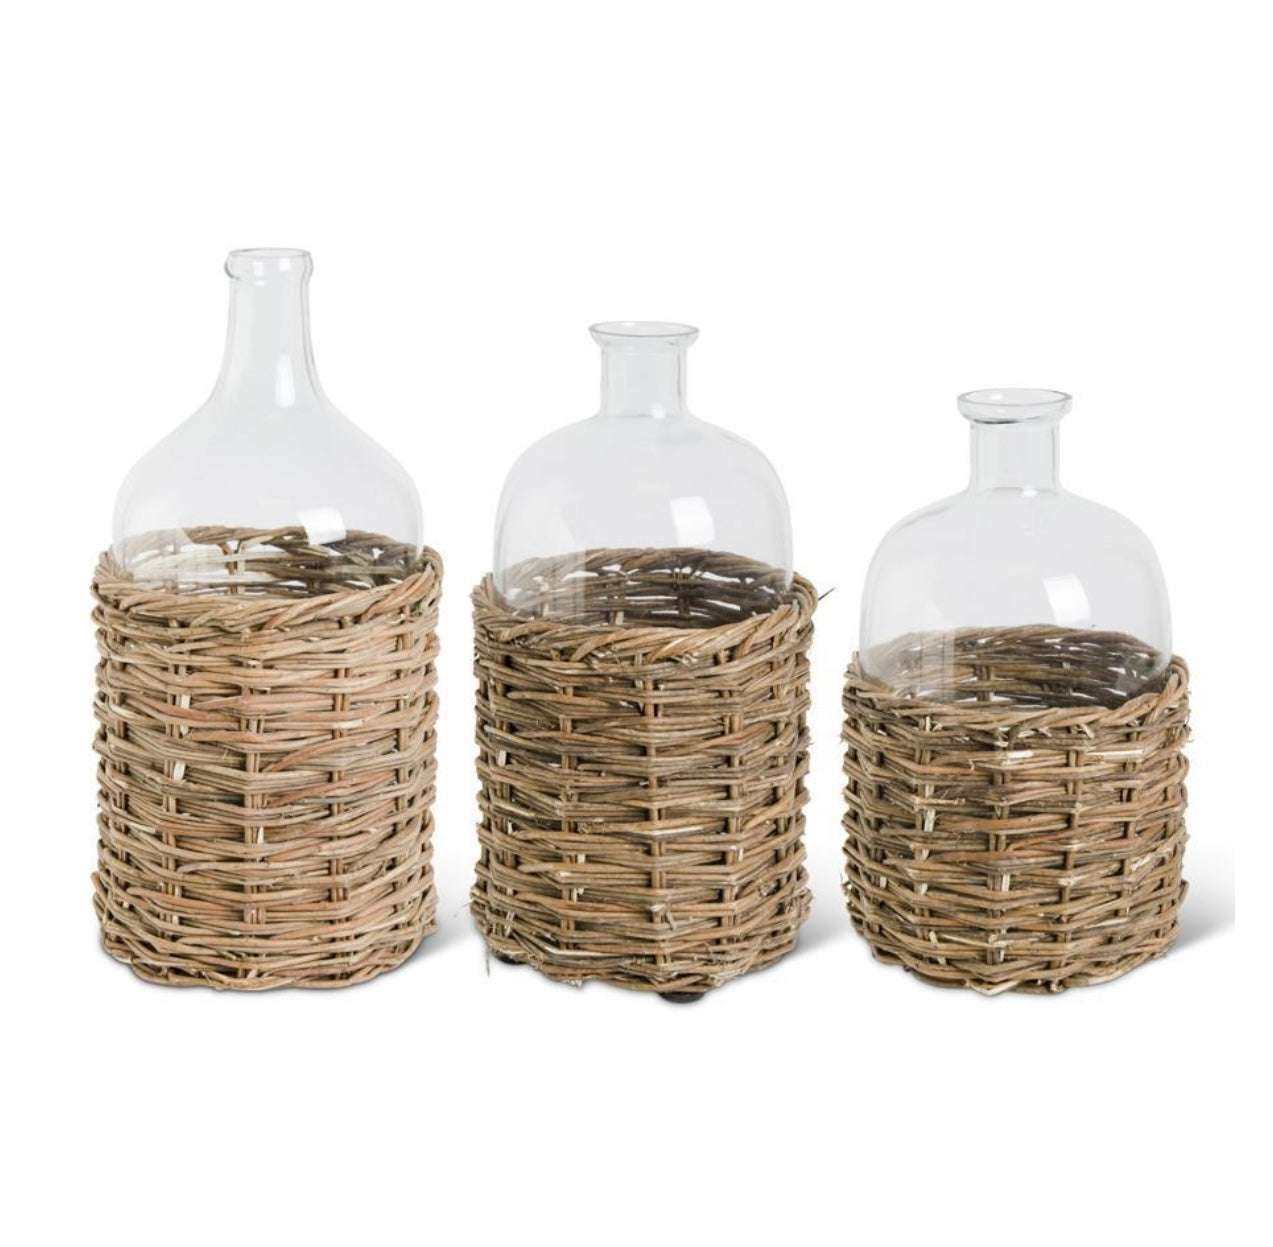 Glass Bottles Wrapped in Woven Basket Casing